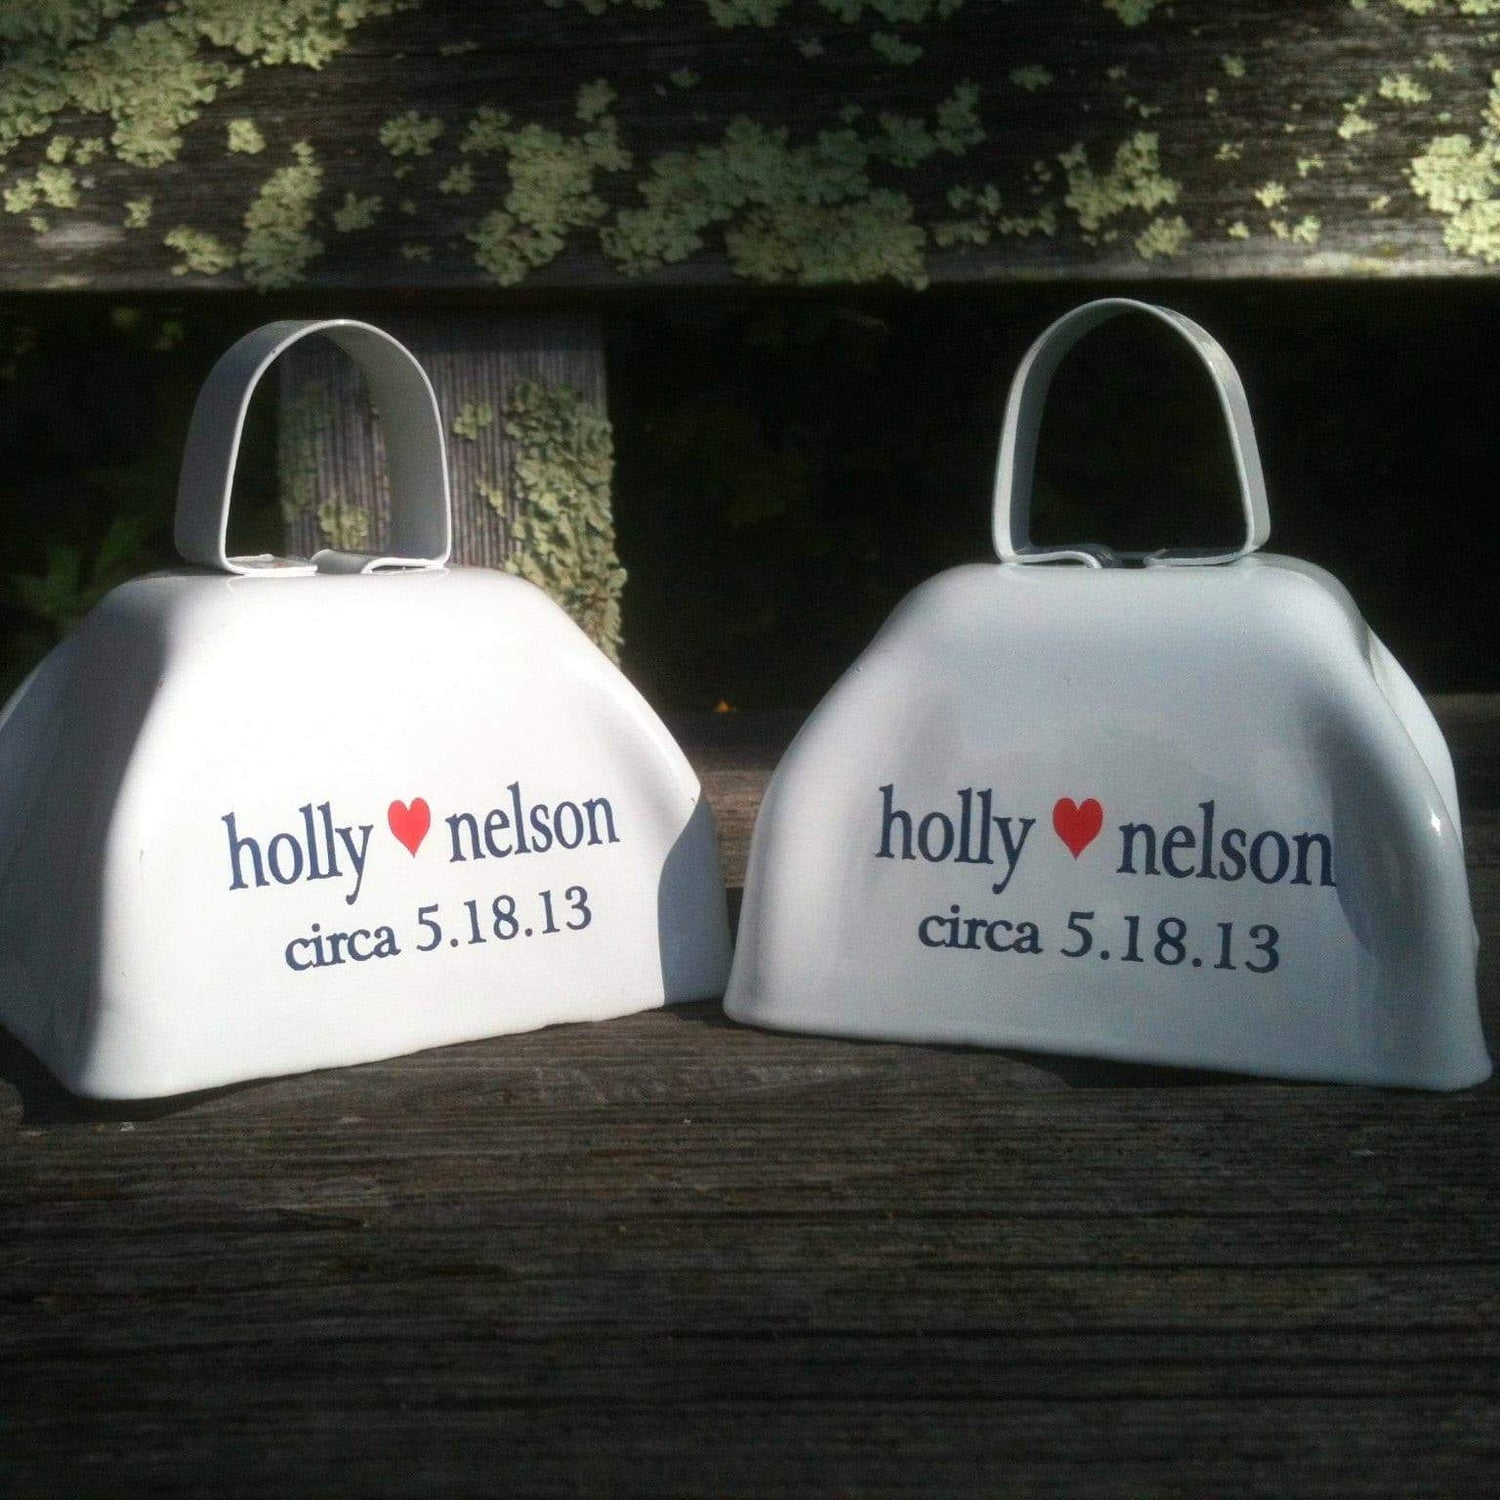 Small Promotional Cow Bell - Customized Party Favors $1.78